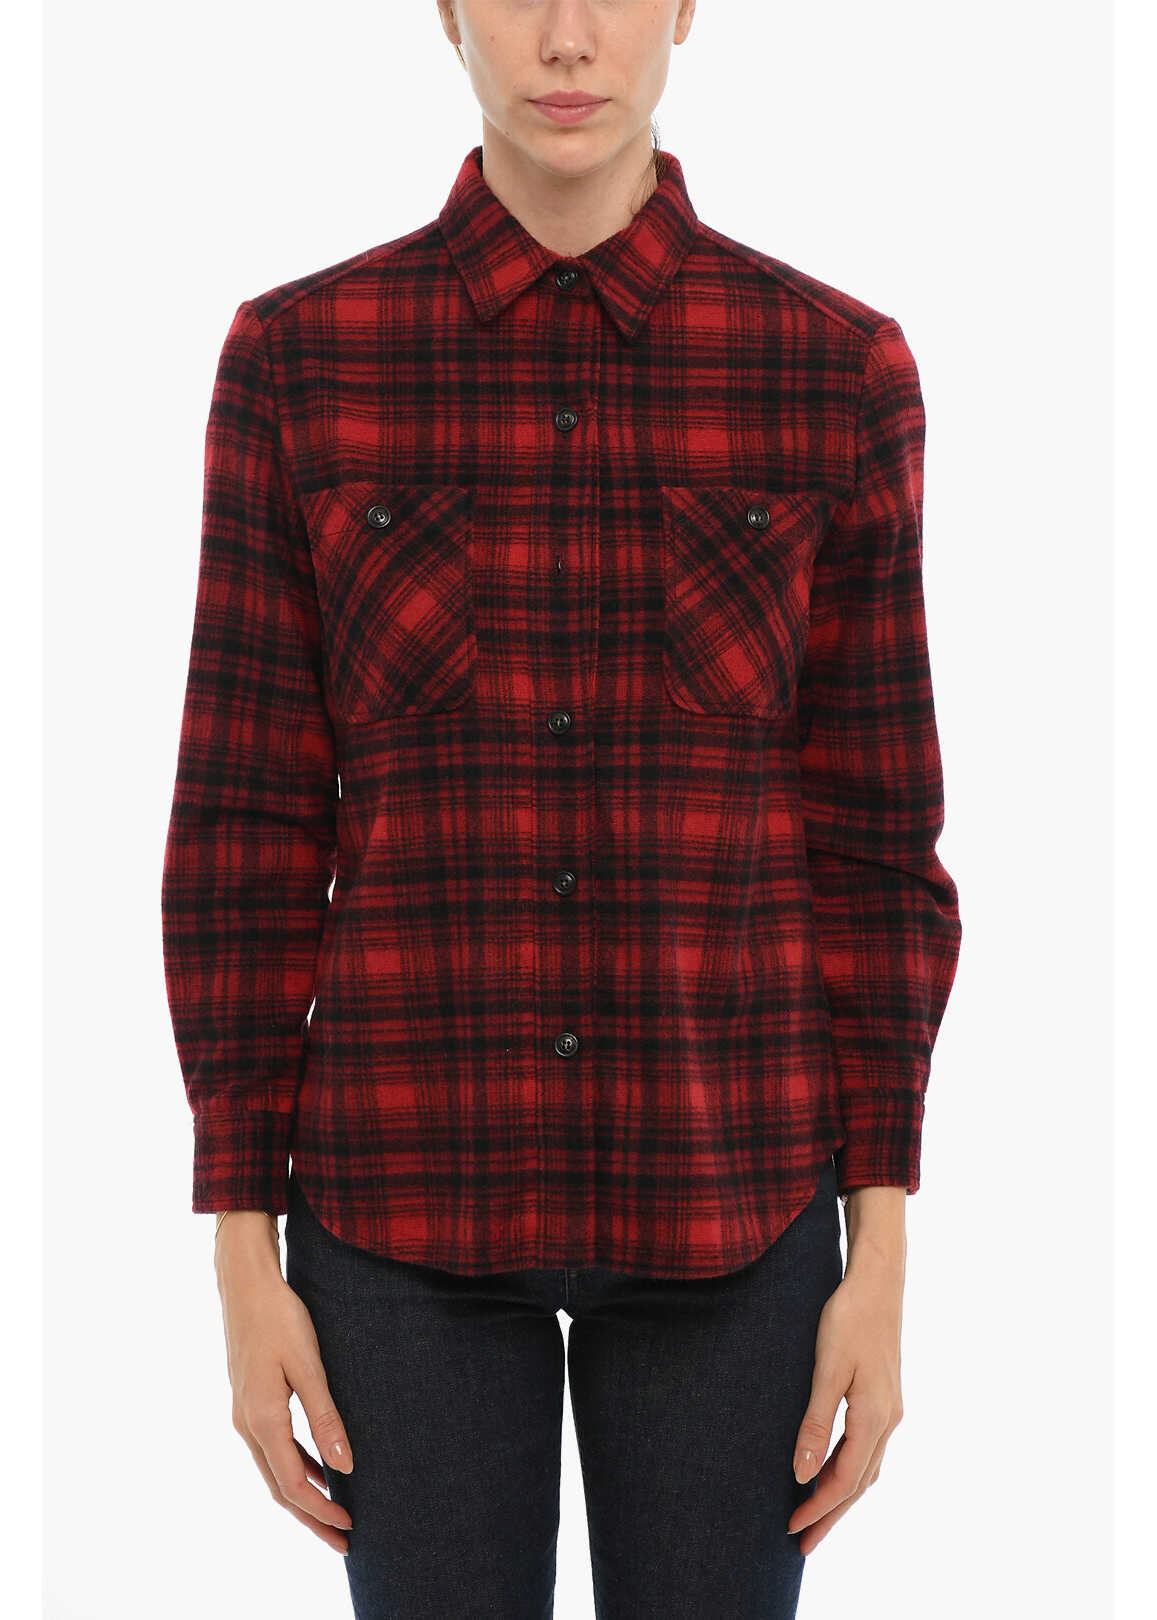 Woolrich Plaid Motif Wool Blend Shirt With Double Breast Pocket Red